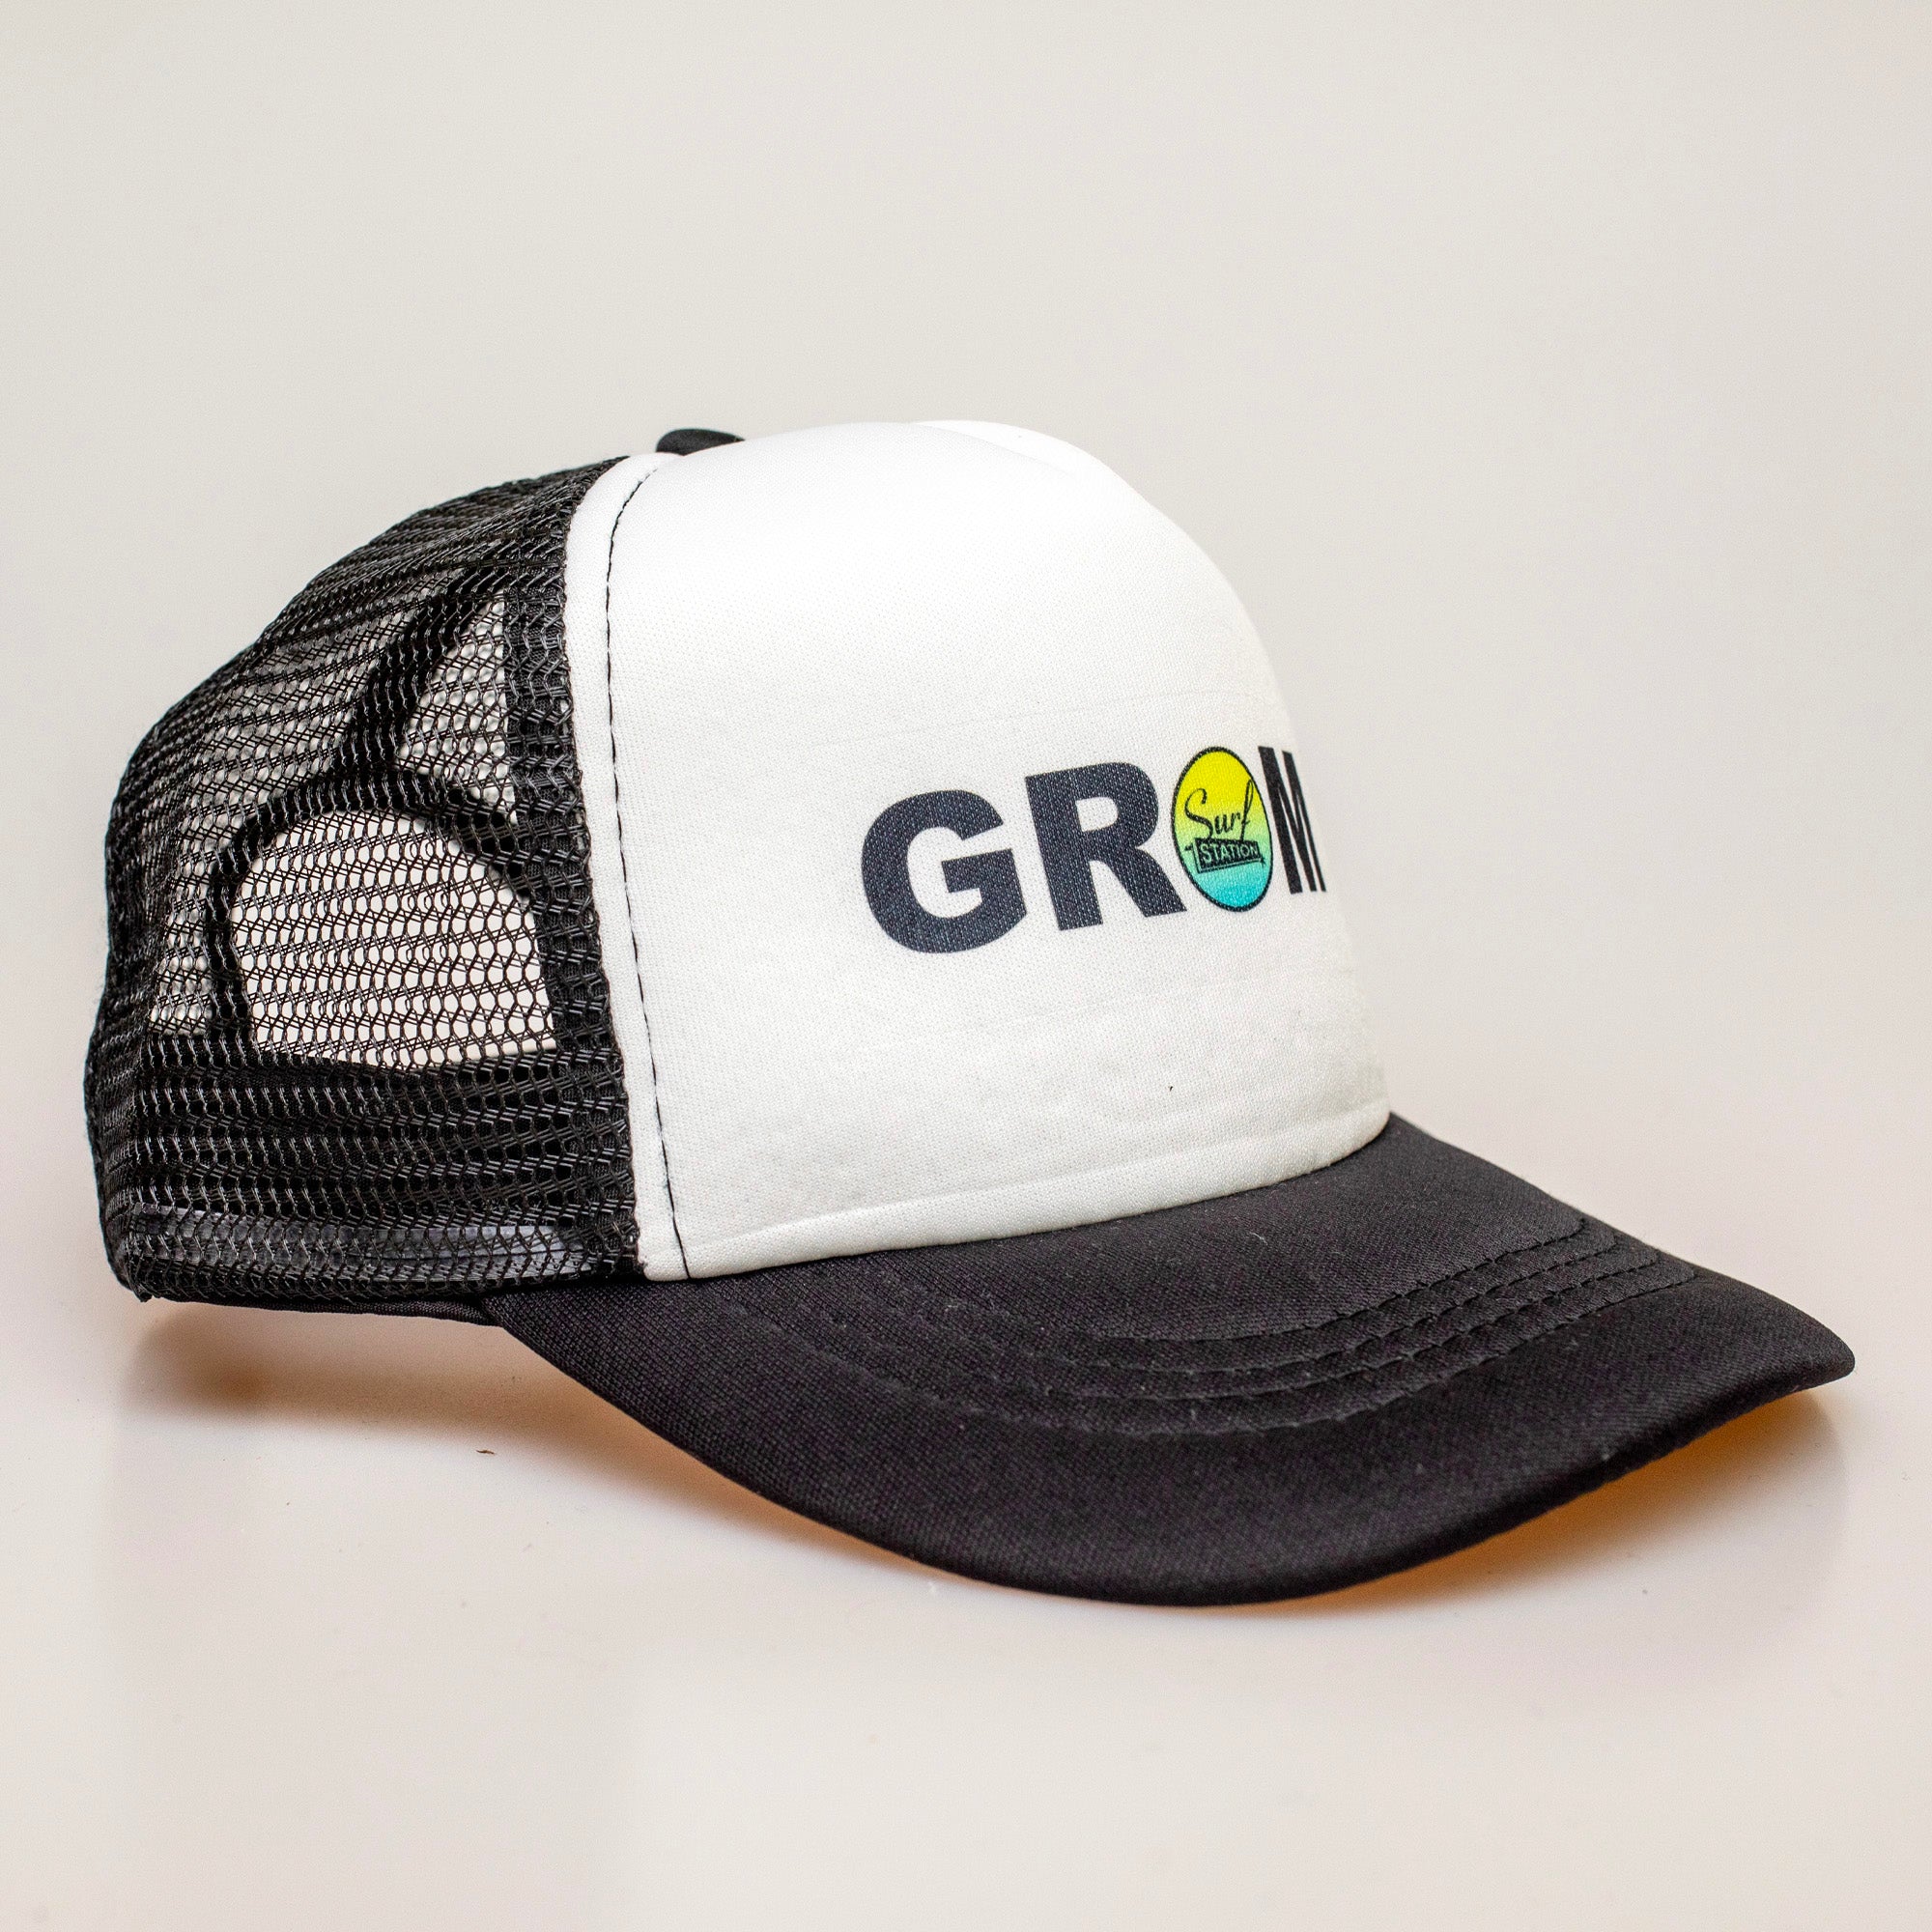 Surf Station Grom Youth Trucker Hat